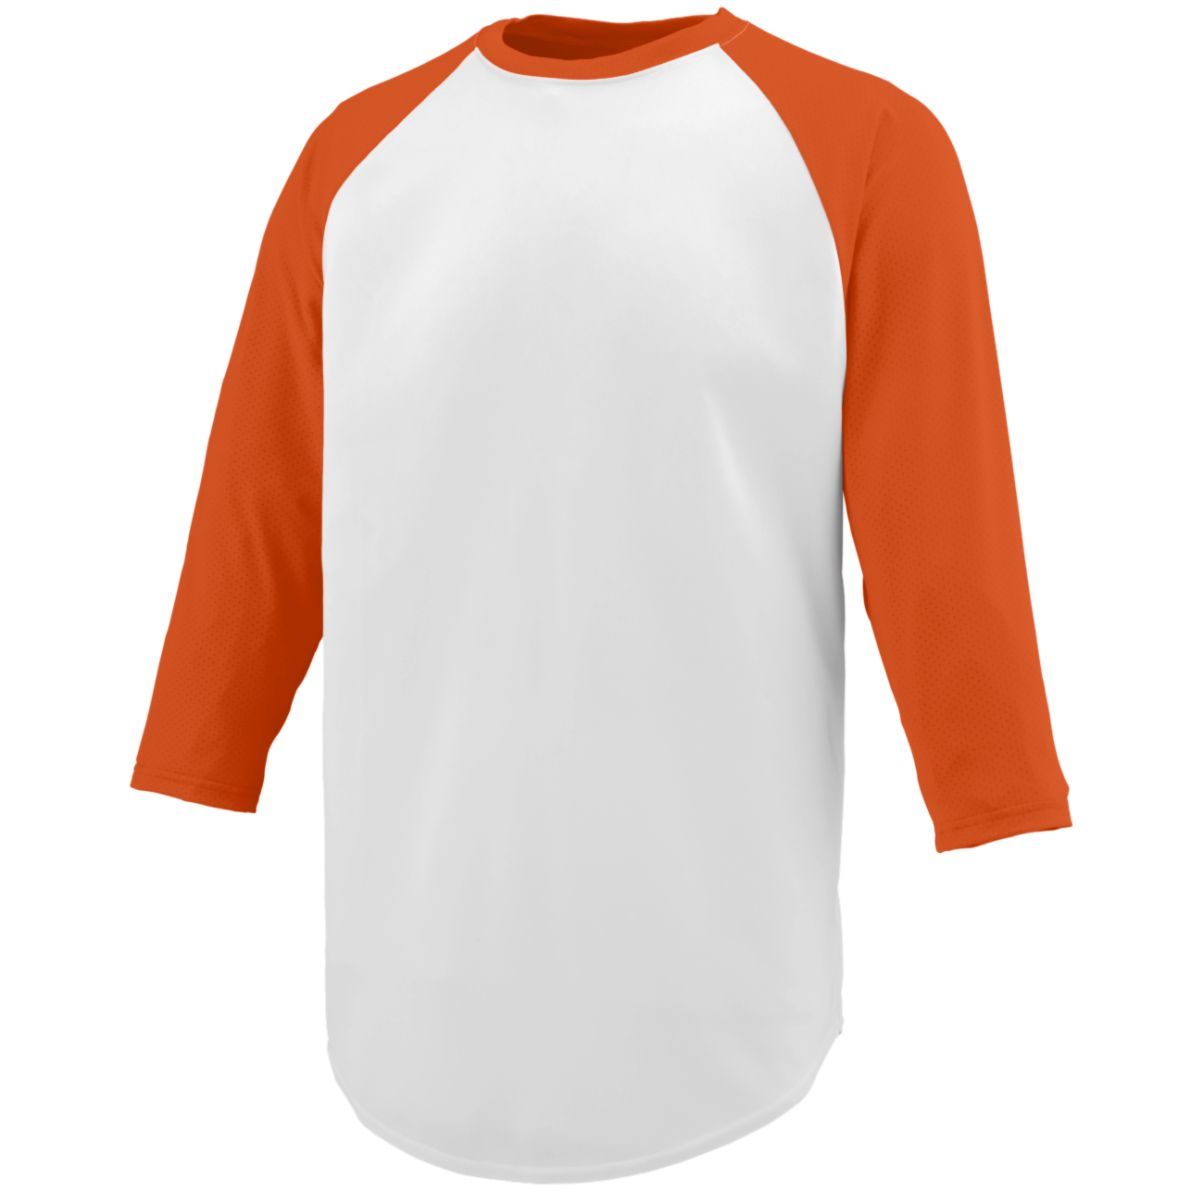 Augusta Sportswear Youth Nova Jersey in White/Orange  -Part of the Youth, Youth-Jersey, Augusta-Products, Baseball, Shirts, All-Sports, All-Sports-1 product lines at KanaleyCreations.com